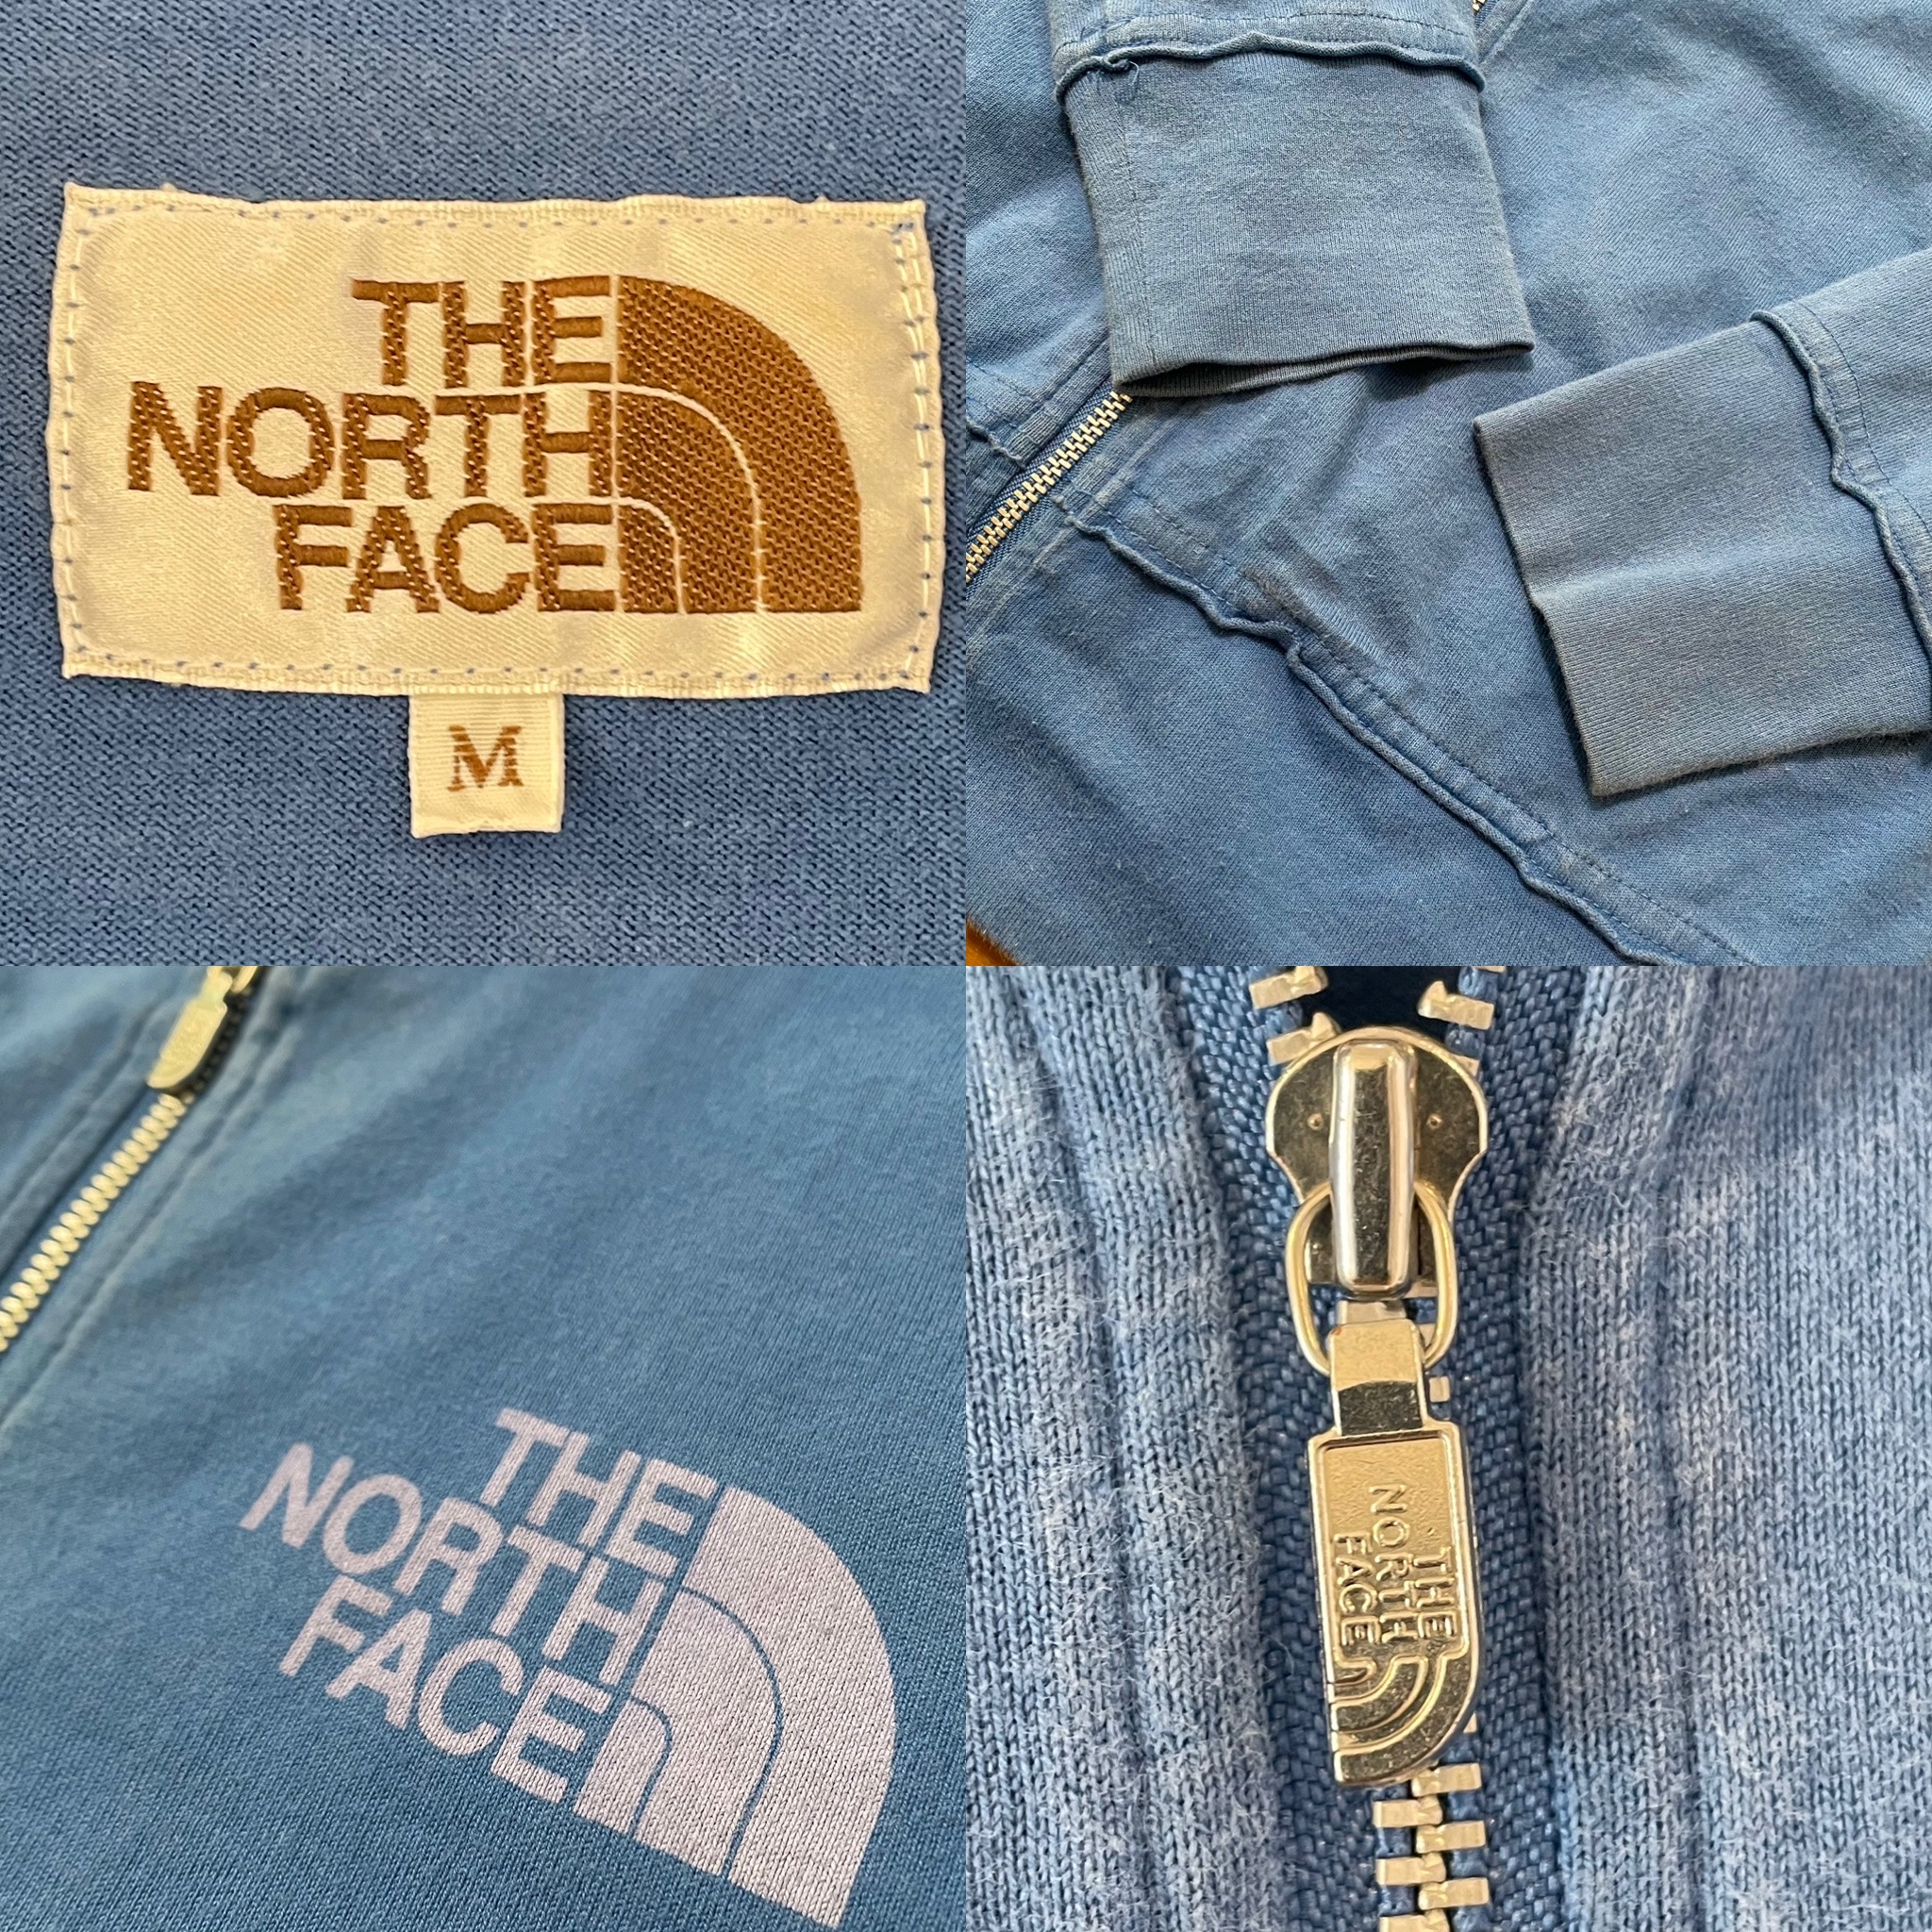 【THE NORTH FACE】茶タグ ジップアップパーカー ロゴ M US古着